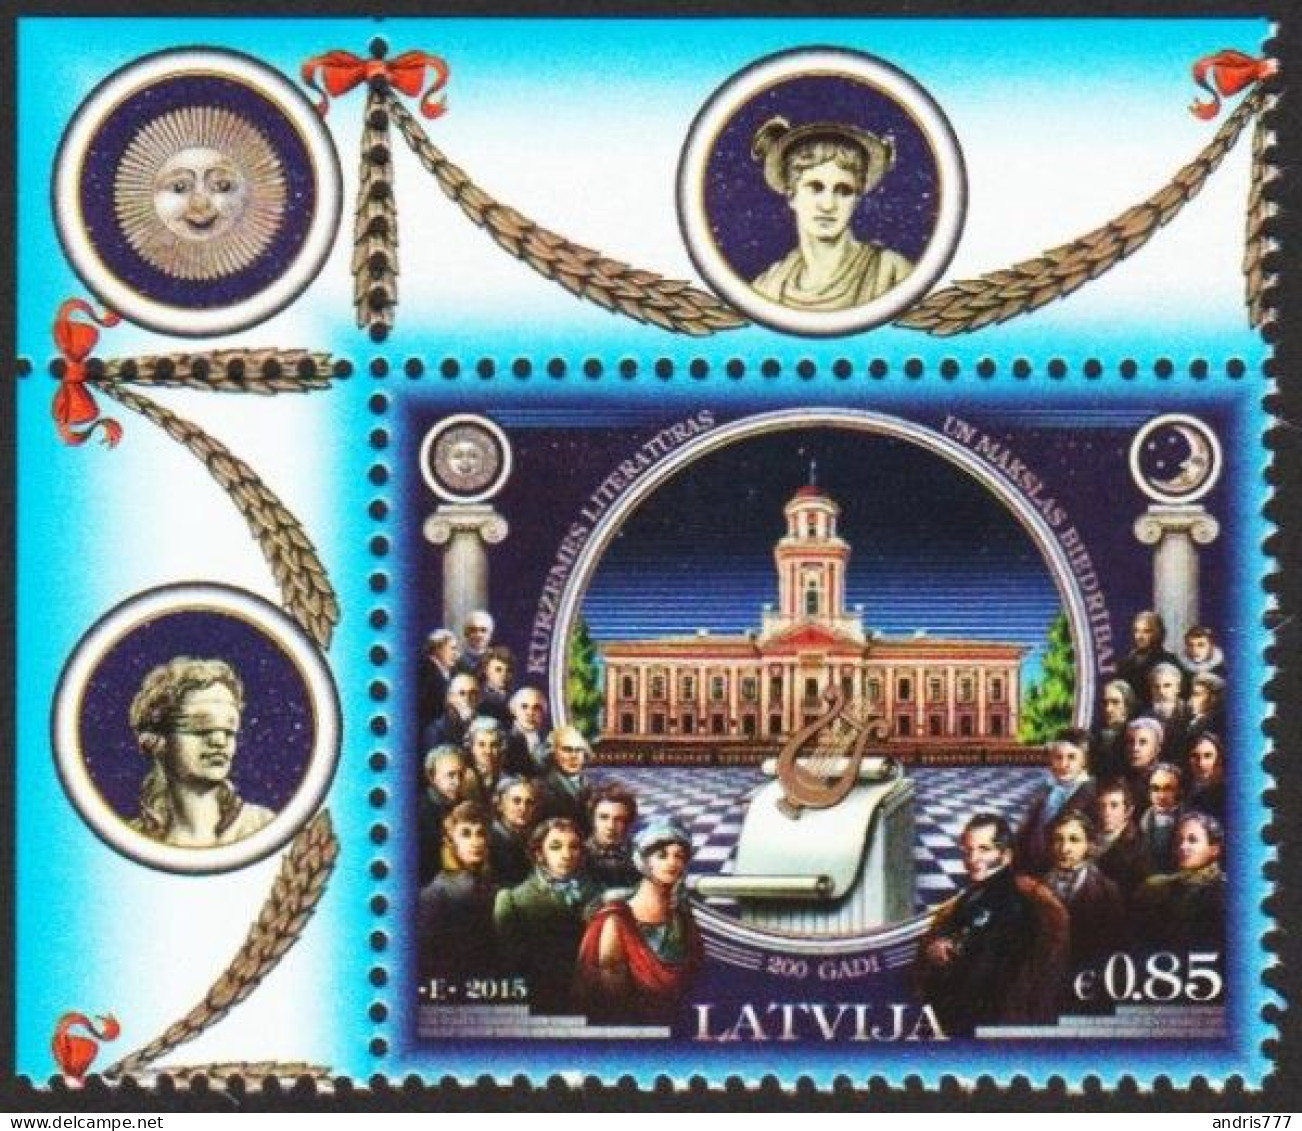 Latvia Lettland Lettonie 2015 (09) Courland Society For Literature And Art - 200 Years (corner) - Latvia